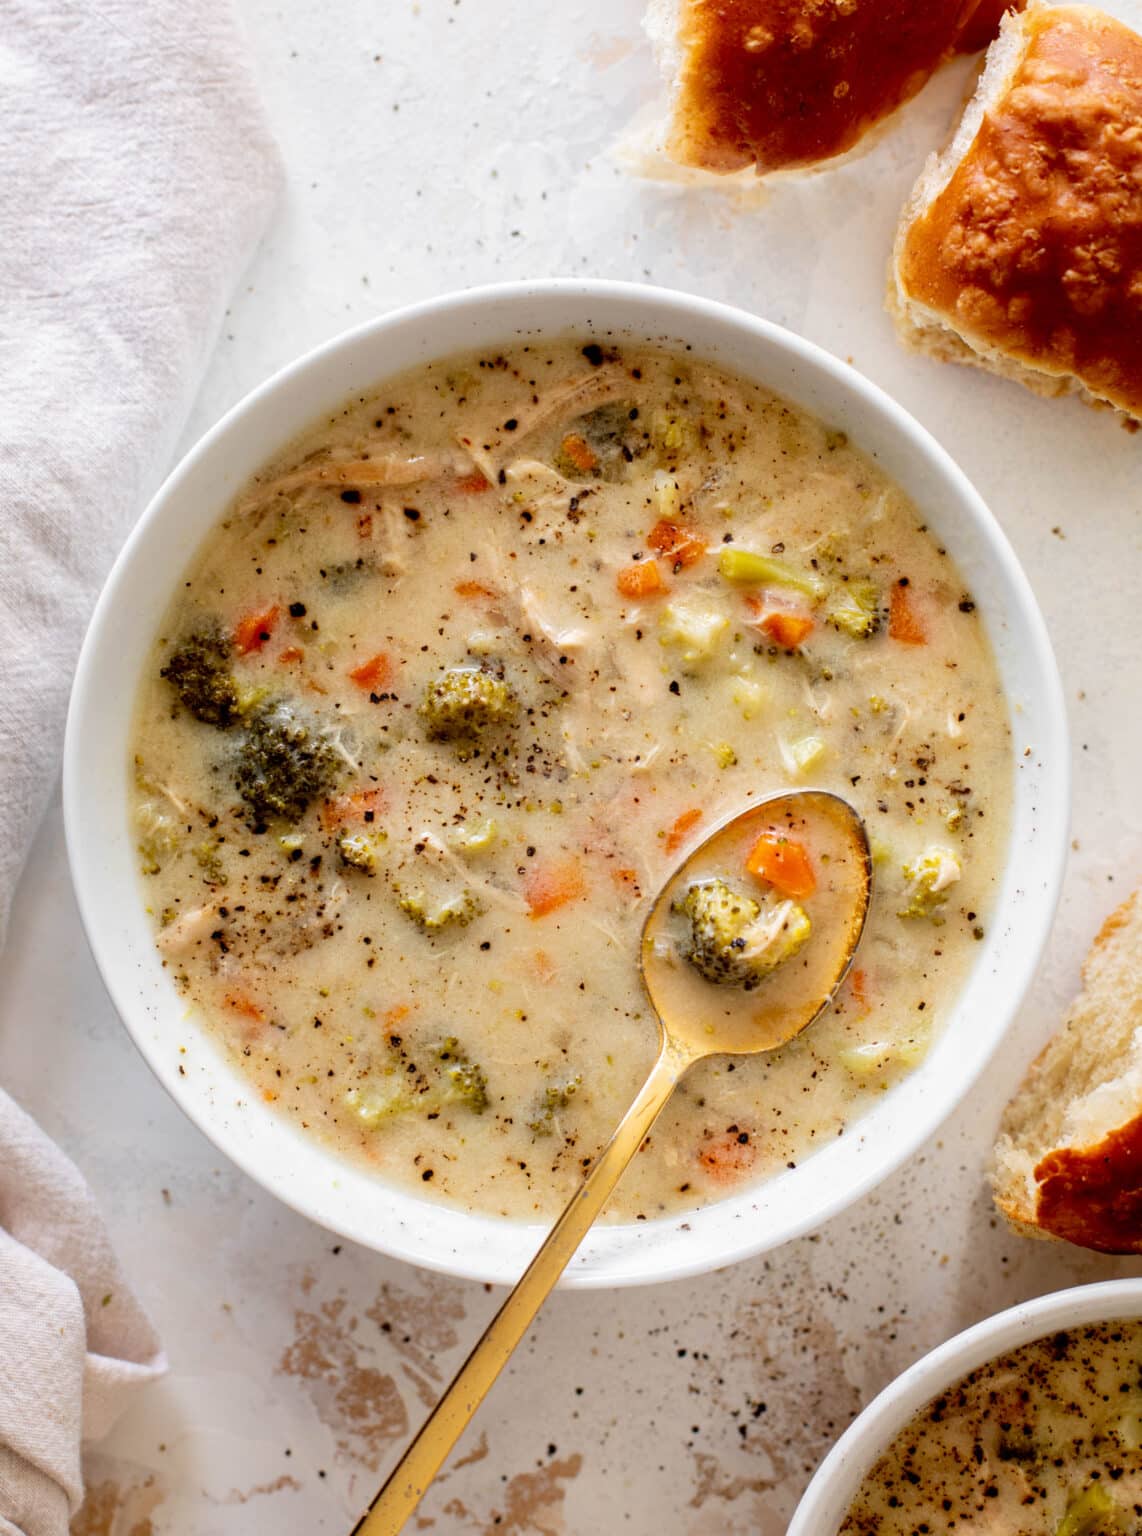 Chicken and Broccoli Soup - Creamy Chicken and Broccoli Soup